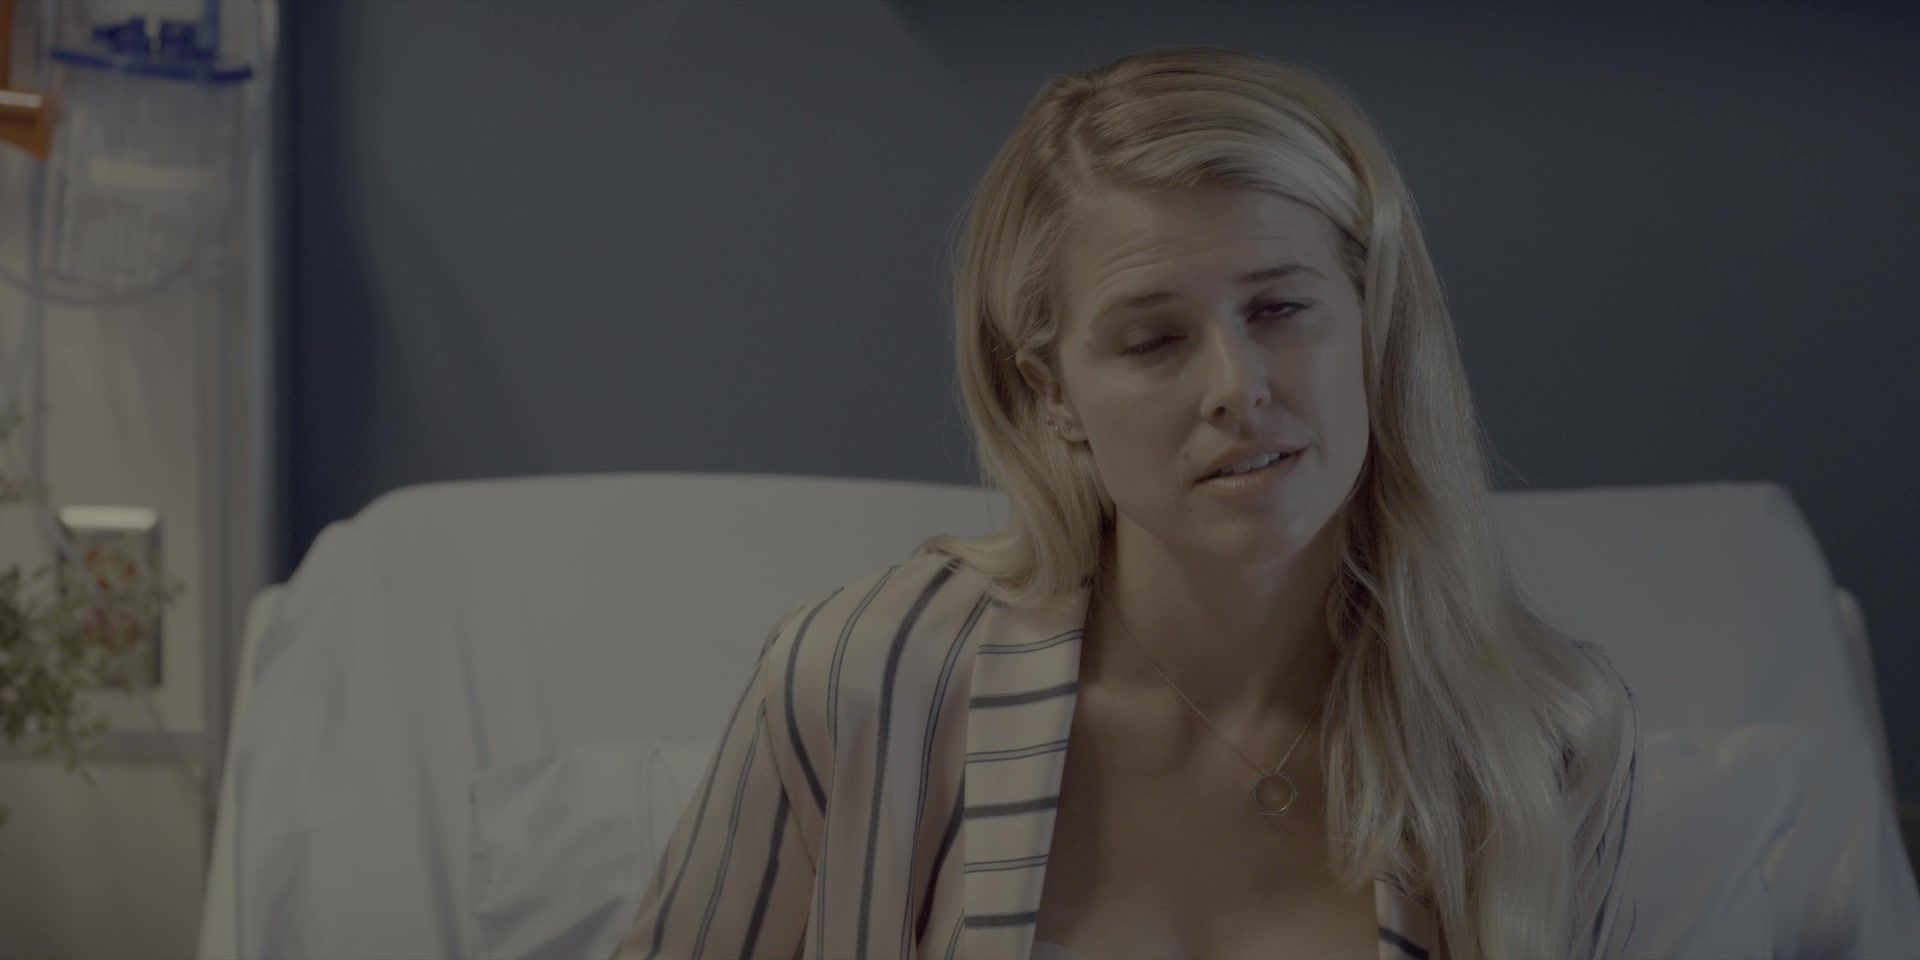 Dick Suckers Nude Willow Shields, Sarah Wright - Spinning Out s01e09-10 (2020) CastingCouch-X